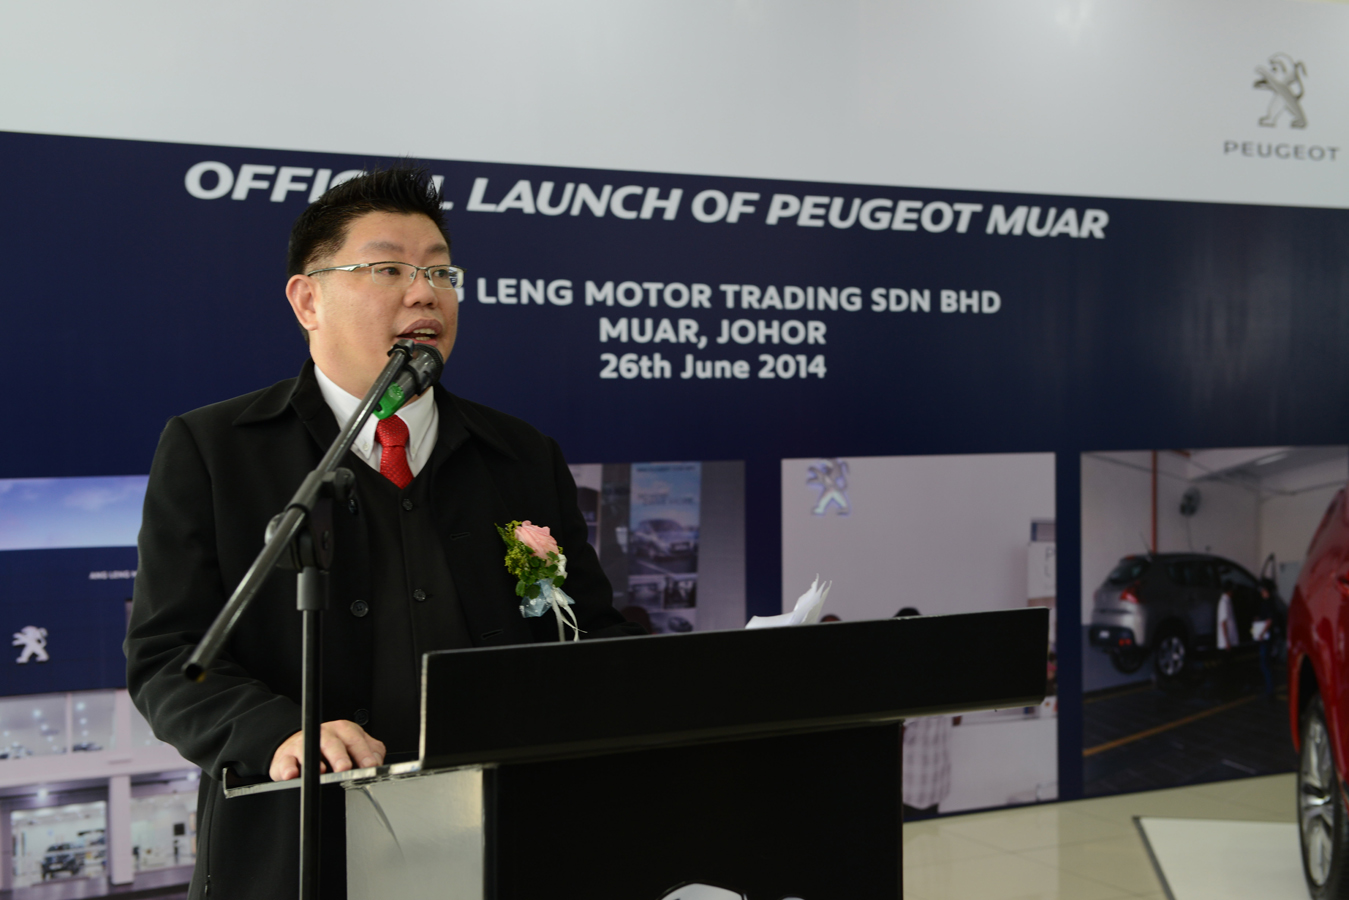 GRAND OPENING OF NEW PEUGEOT SHOWROOM